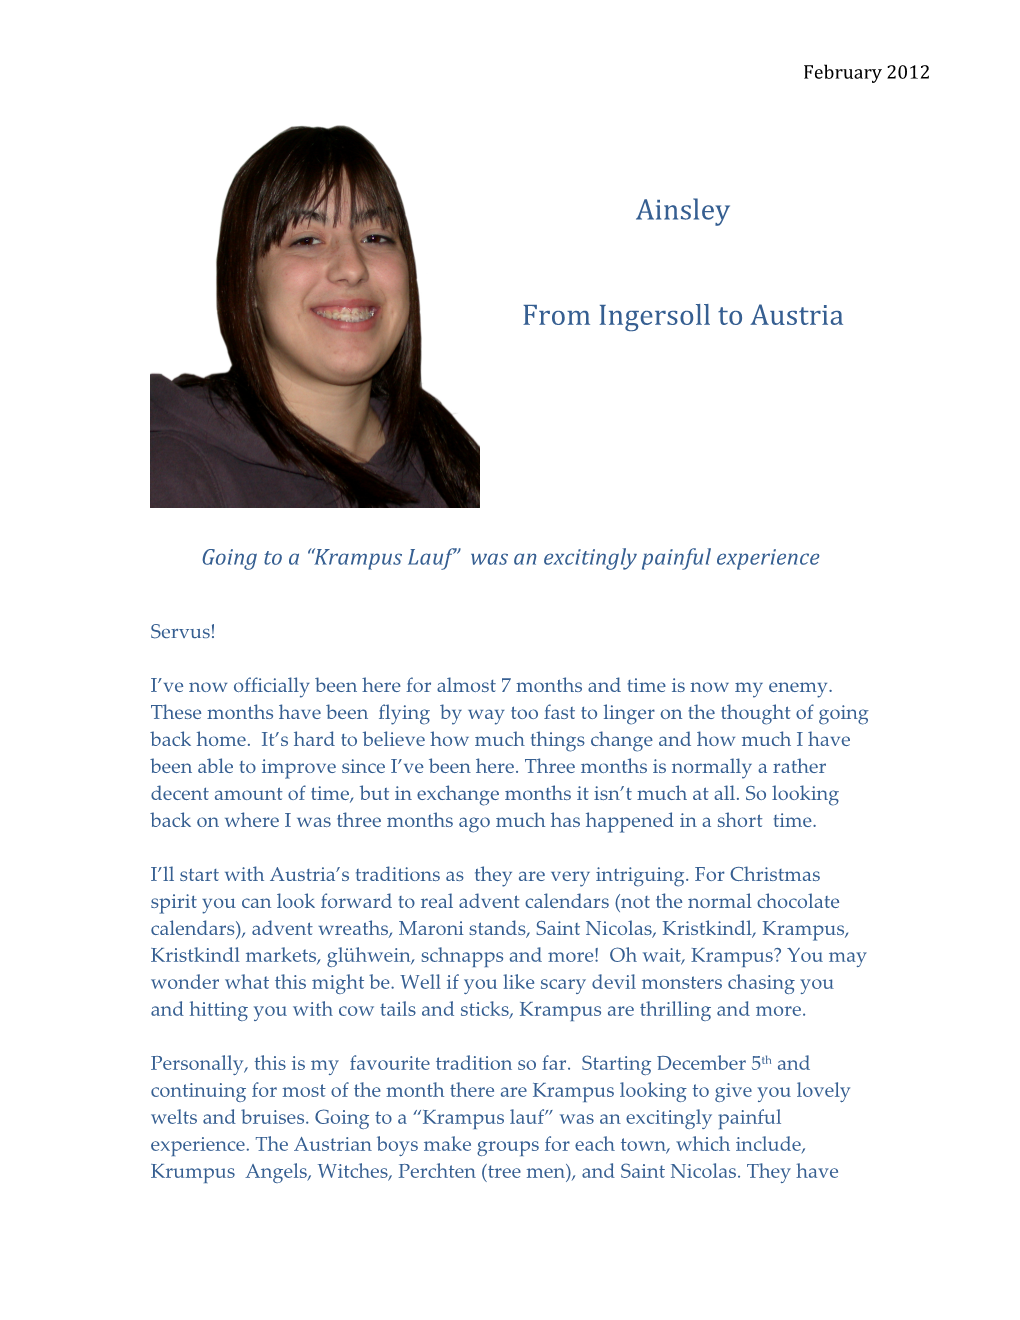 Ainsley from Ingersoll to Austria